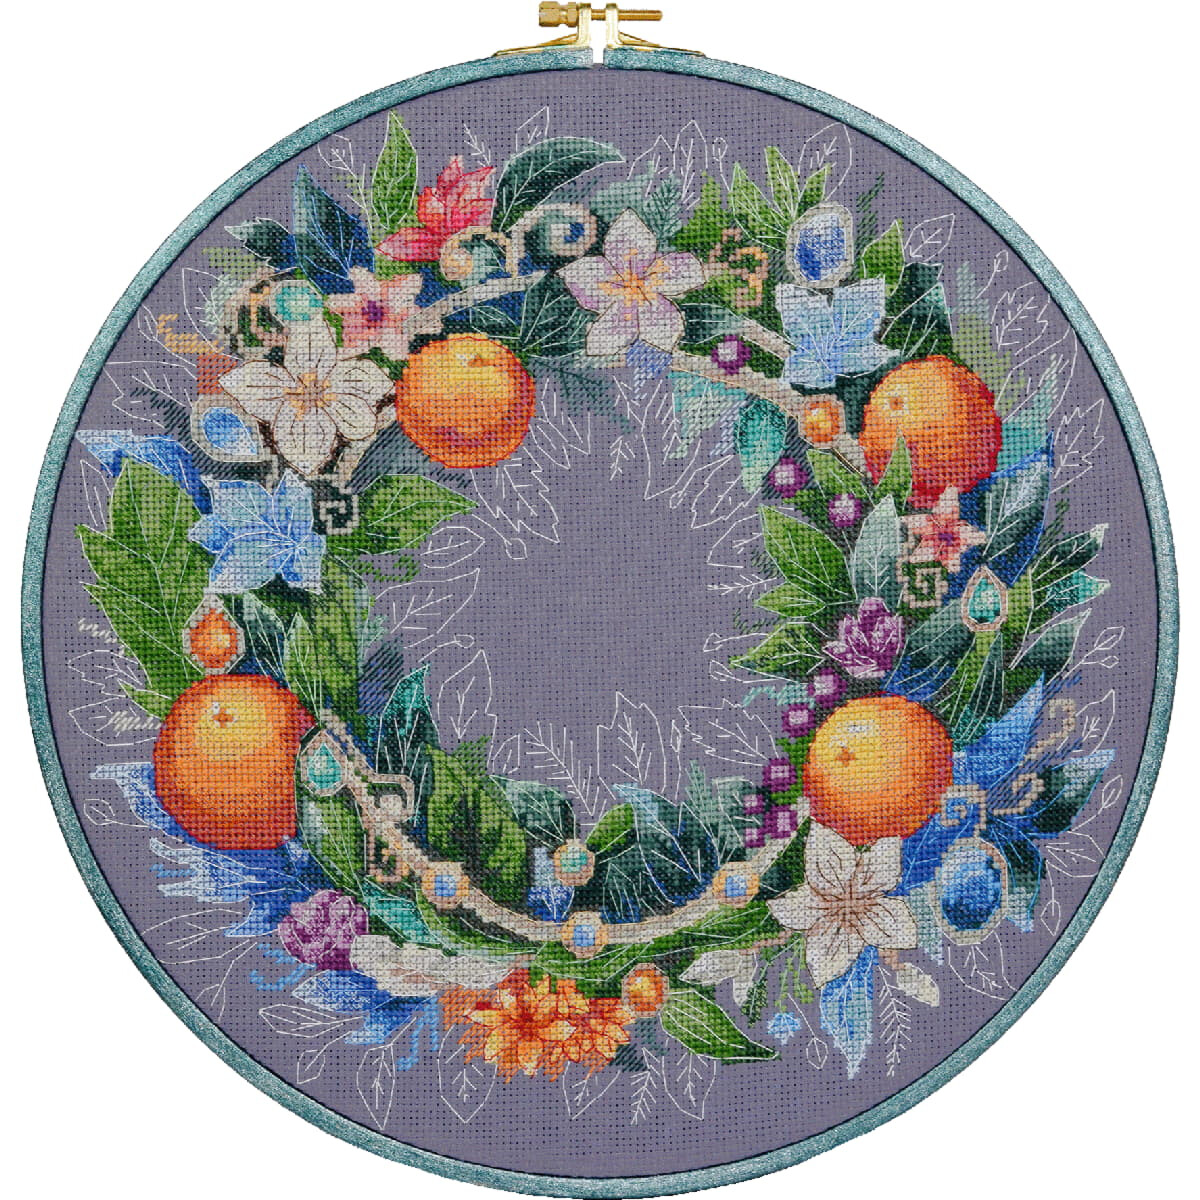 Abris Art counted cross stitch kit "An Exquisite...